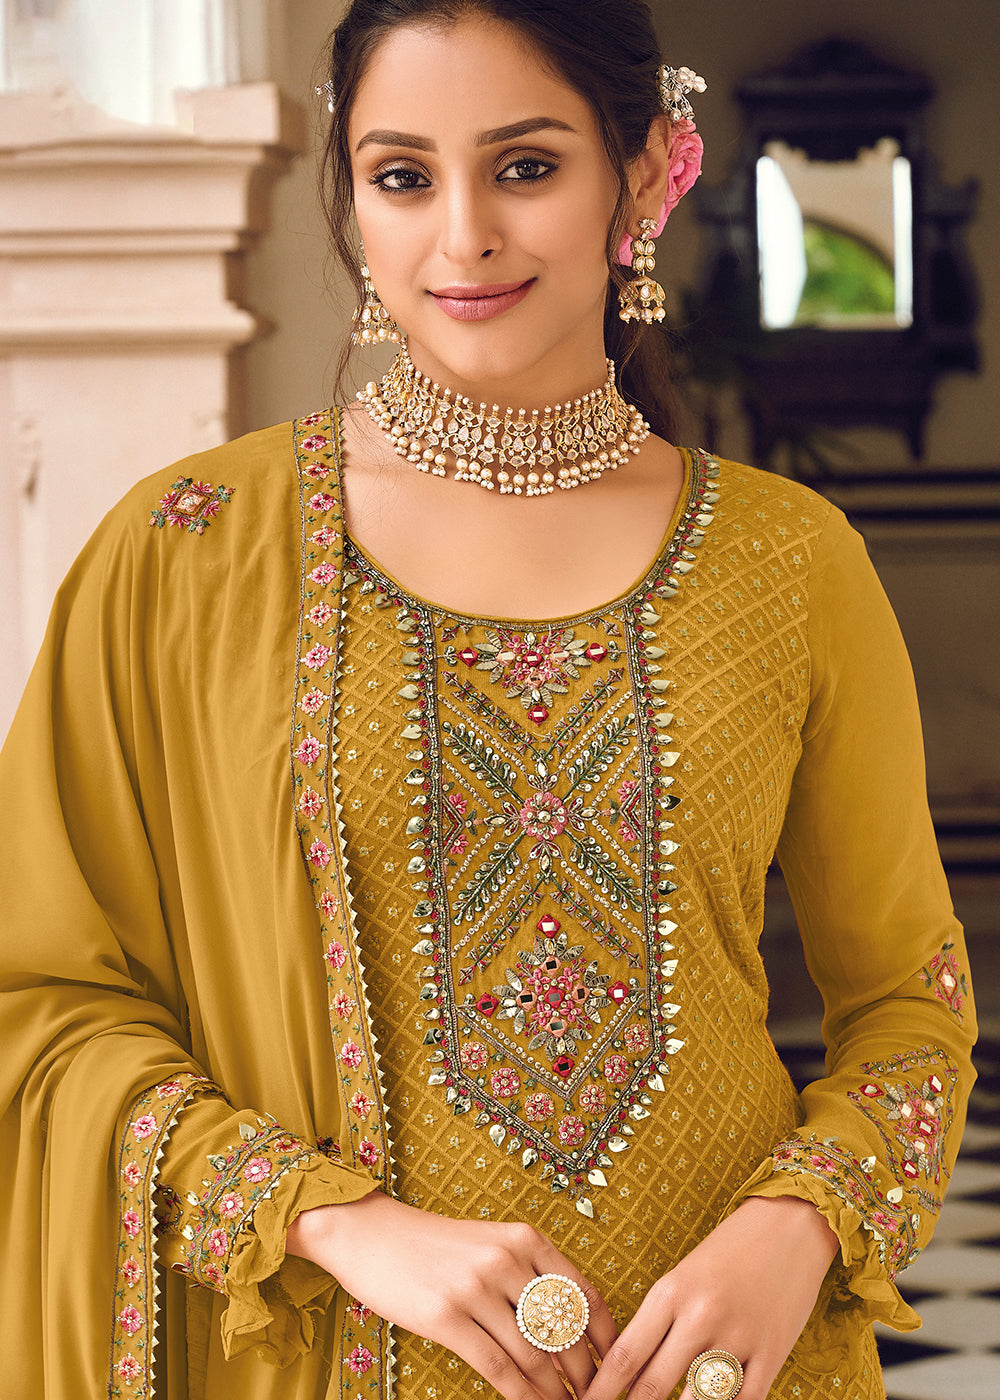 Buy Now Mustard Yellow Embroidered Georgette Ceremonial Salwar Suit Online in USA, UK, Canada & Worldwide at Empress Clothing.